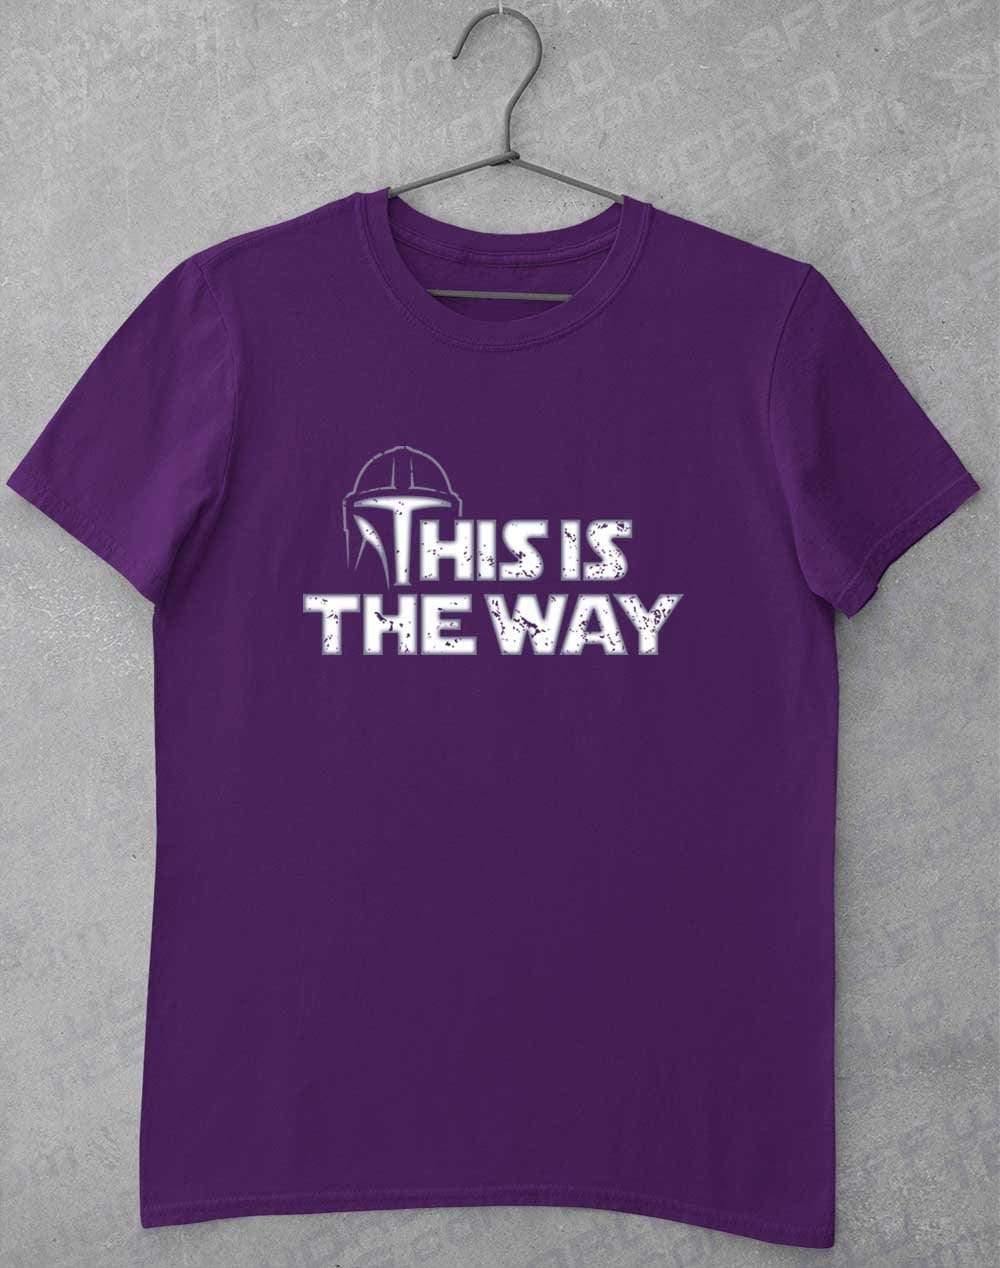 This is the Way - T-Shirt S / Purple  - Off World Tees